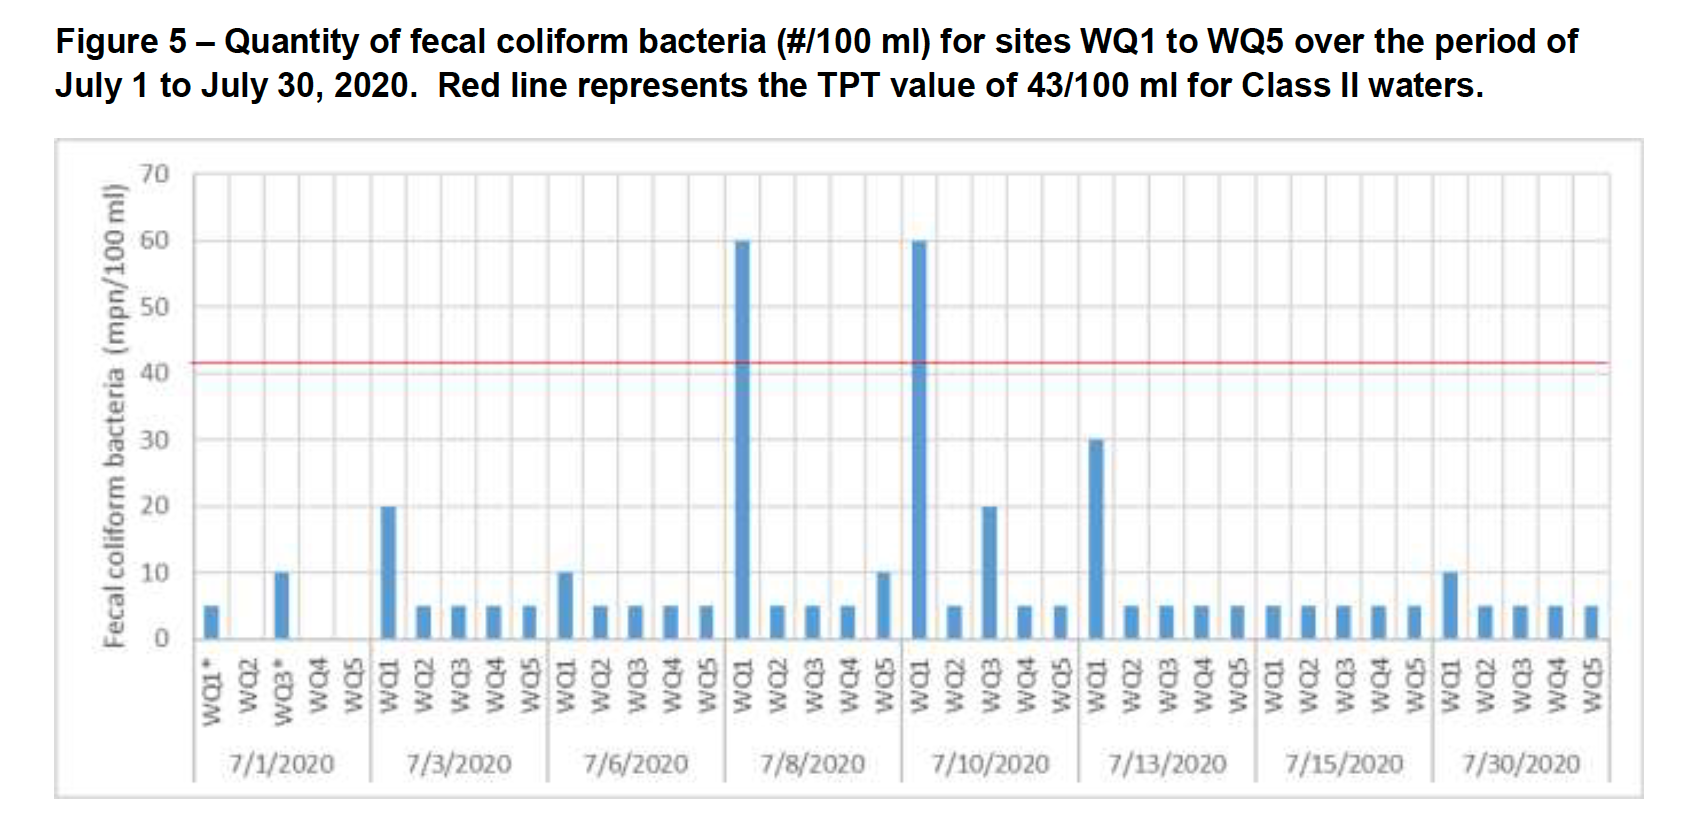 Quantity of fecal coliform bacteria (#/100 ml) for sites WQ1 to WQ5 over the period of July 1 to July 30. The red line represents the TPT value of 43/100 ml for Class II waters.